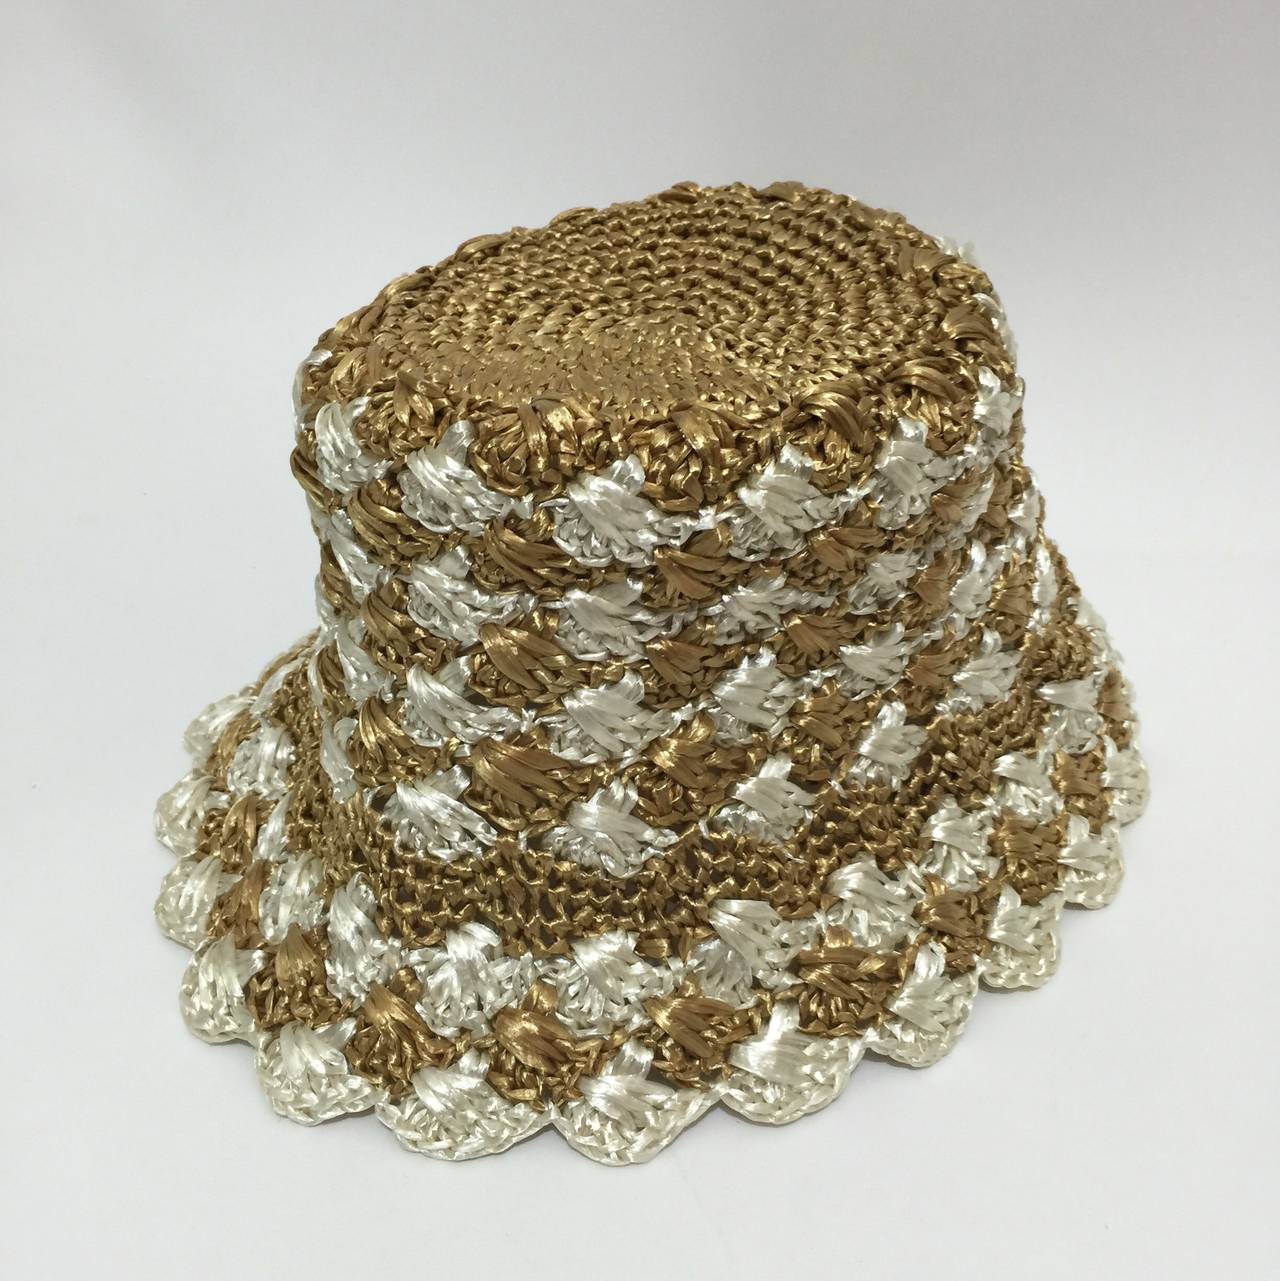 Prada hat made entirely of raffia. In excellent condition. The colors are ivory and golden taupe. Excellent condition.
measurements;
across top of hat 6 inches
circumference: 23 inches

